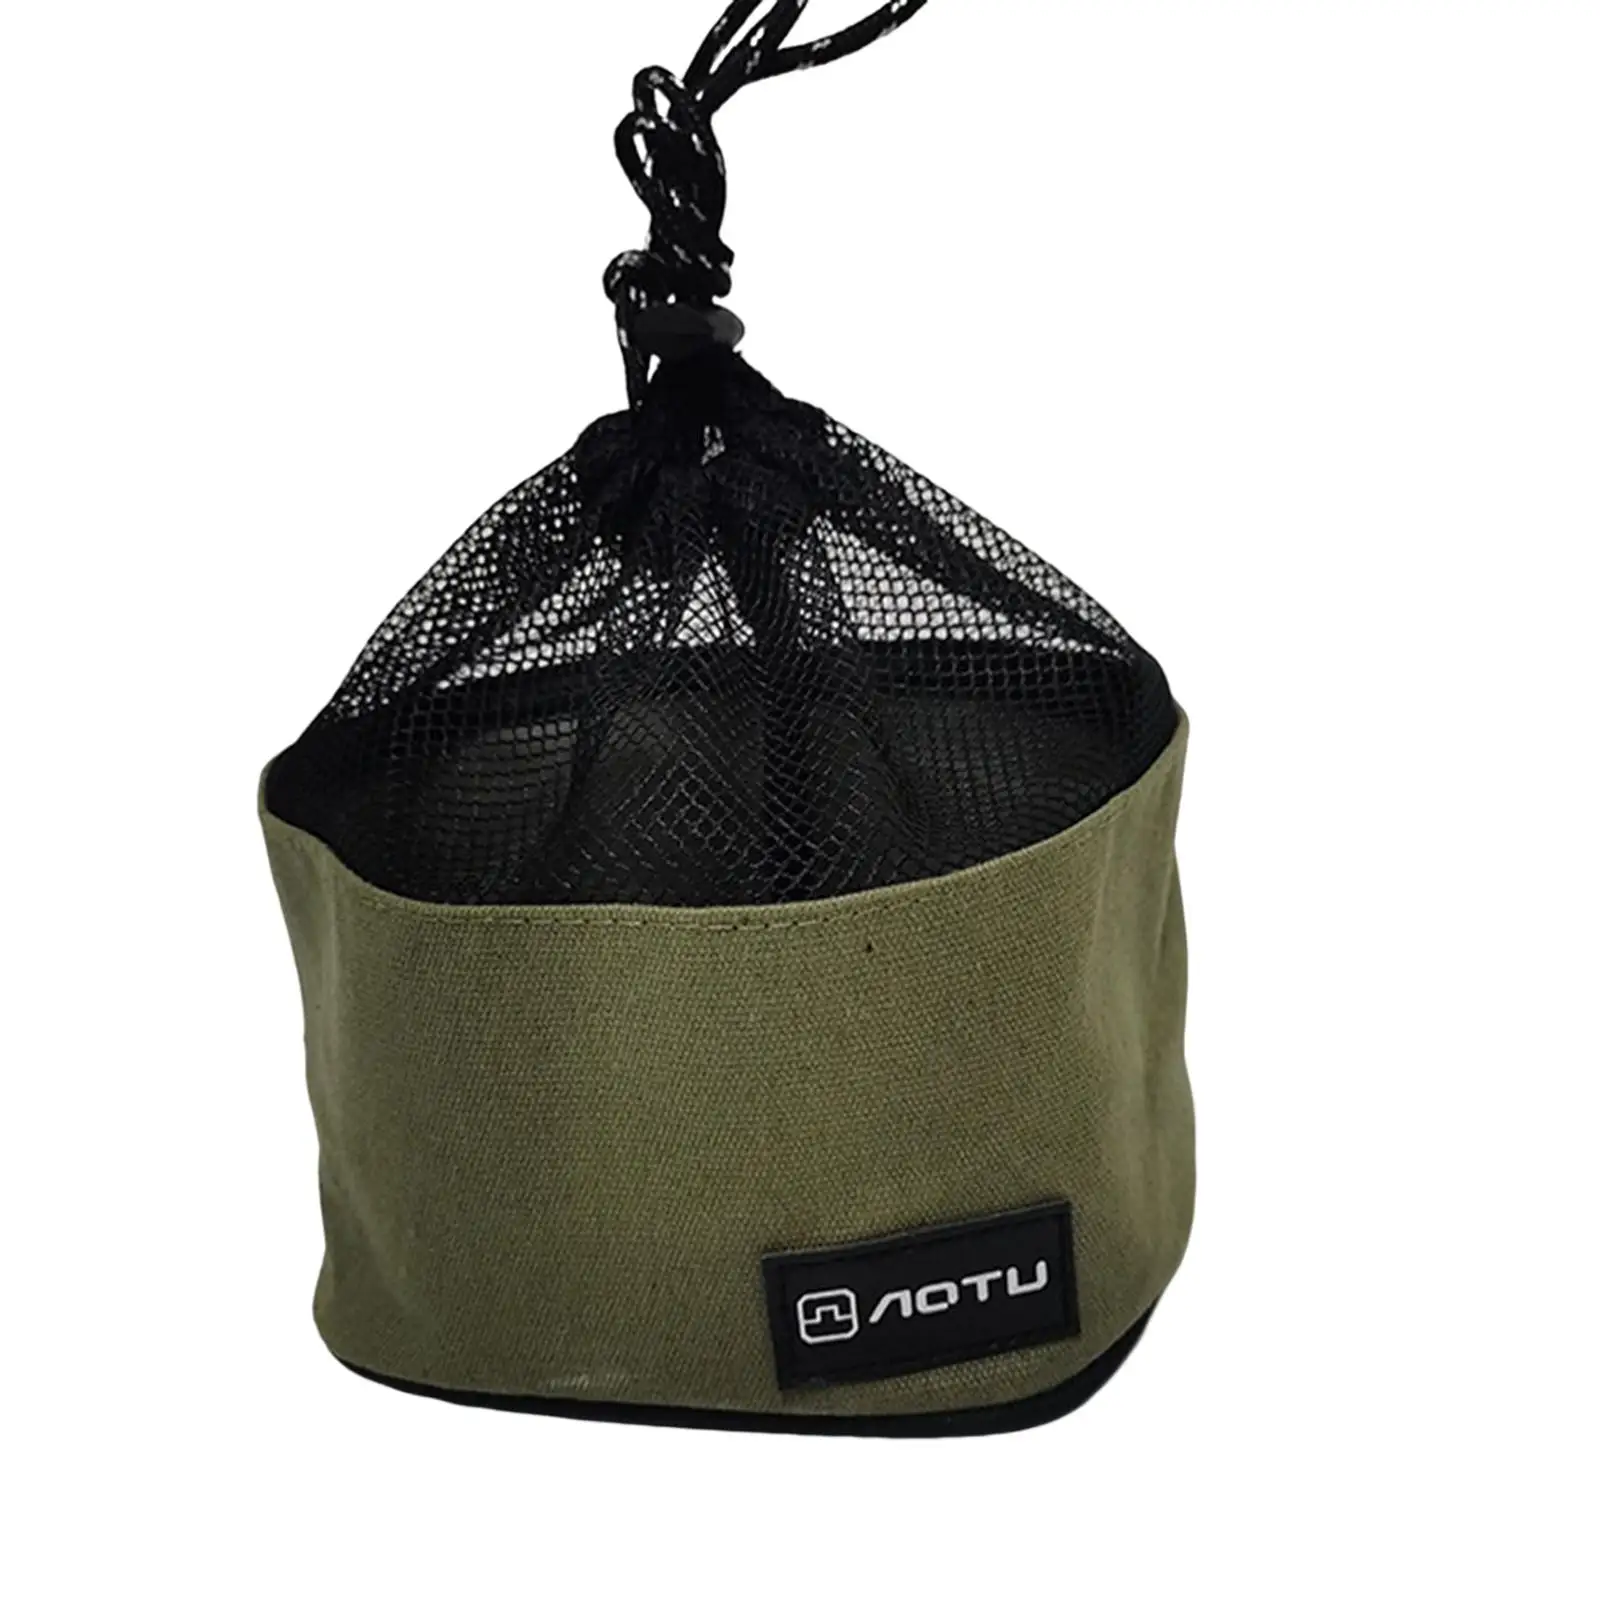 Portable Camping Cookware Storage Bag Case Drawstring Bag Pouch Tote Tableware